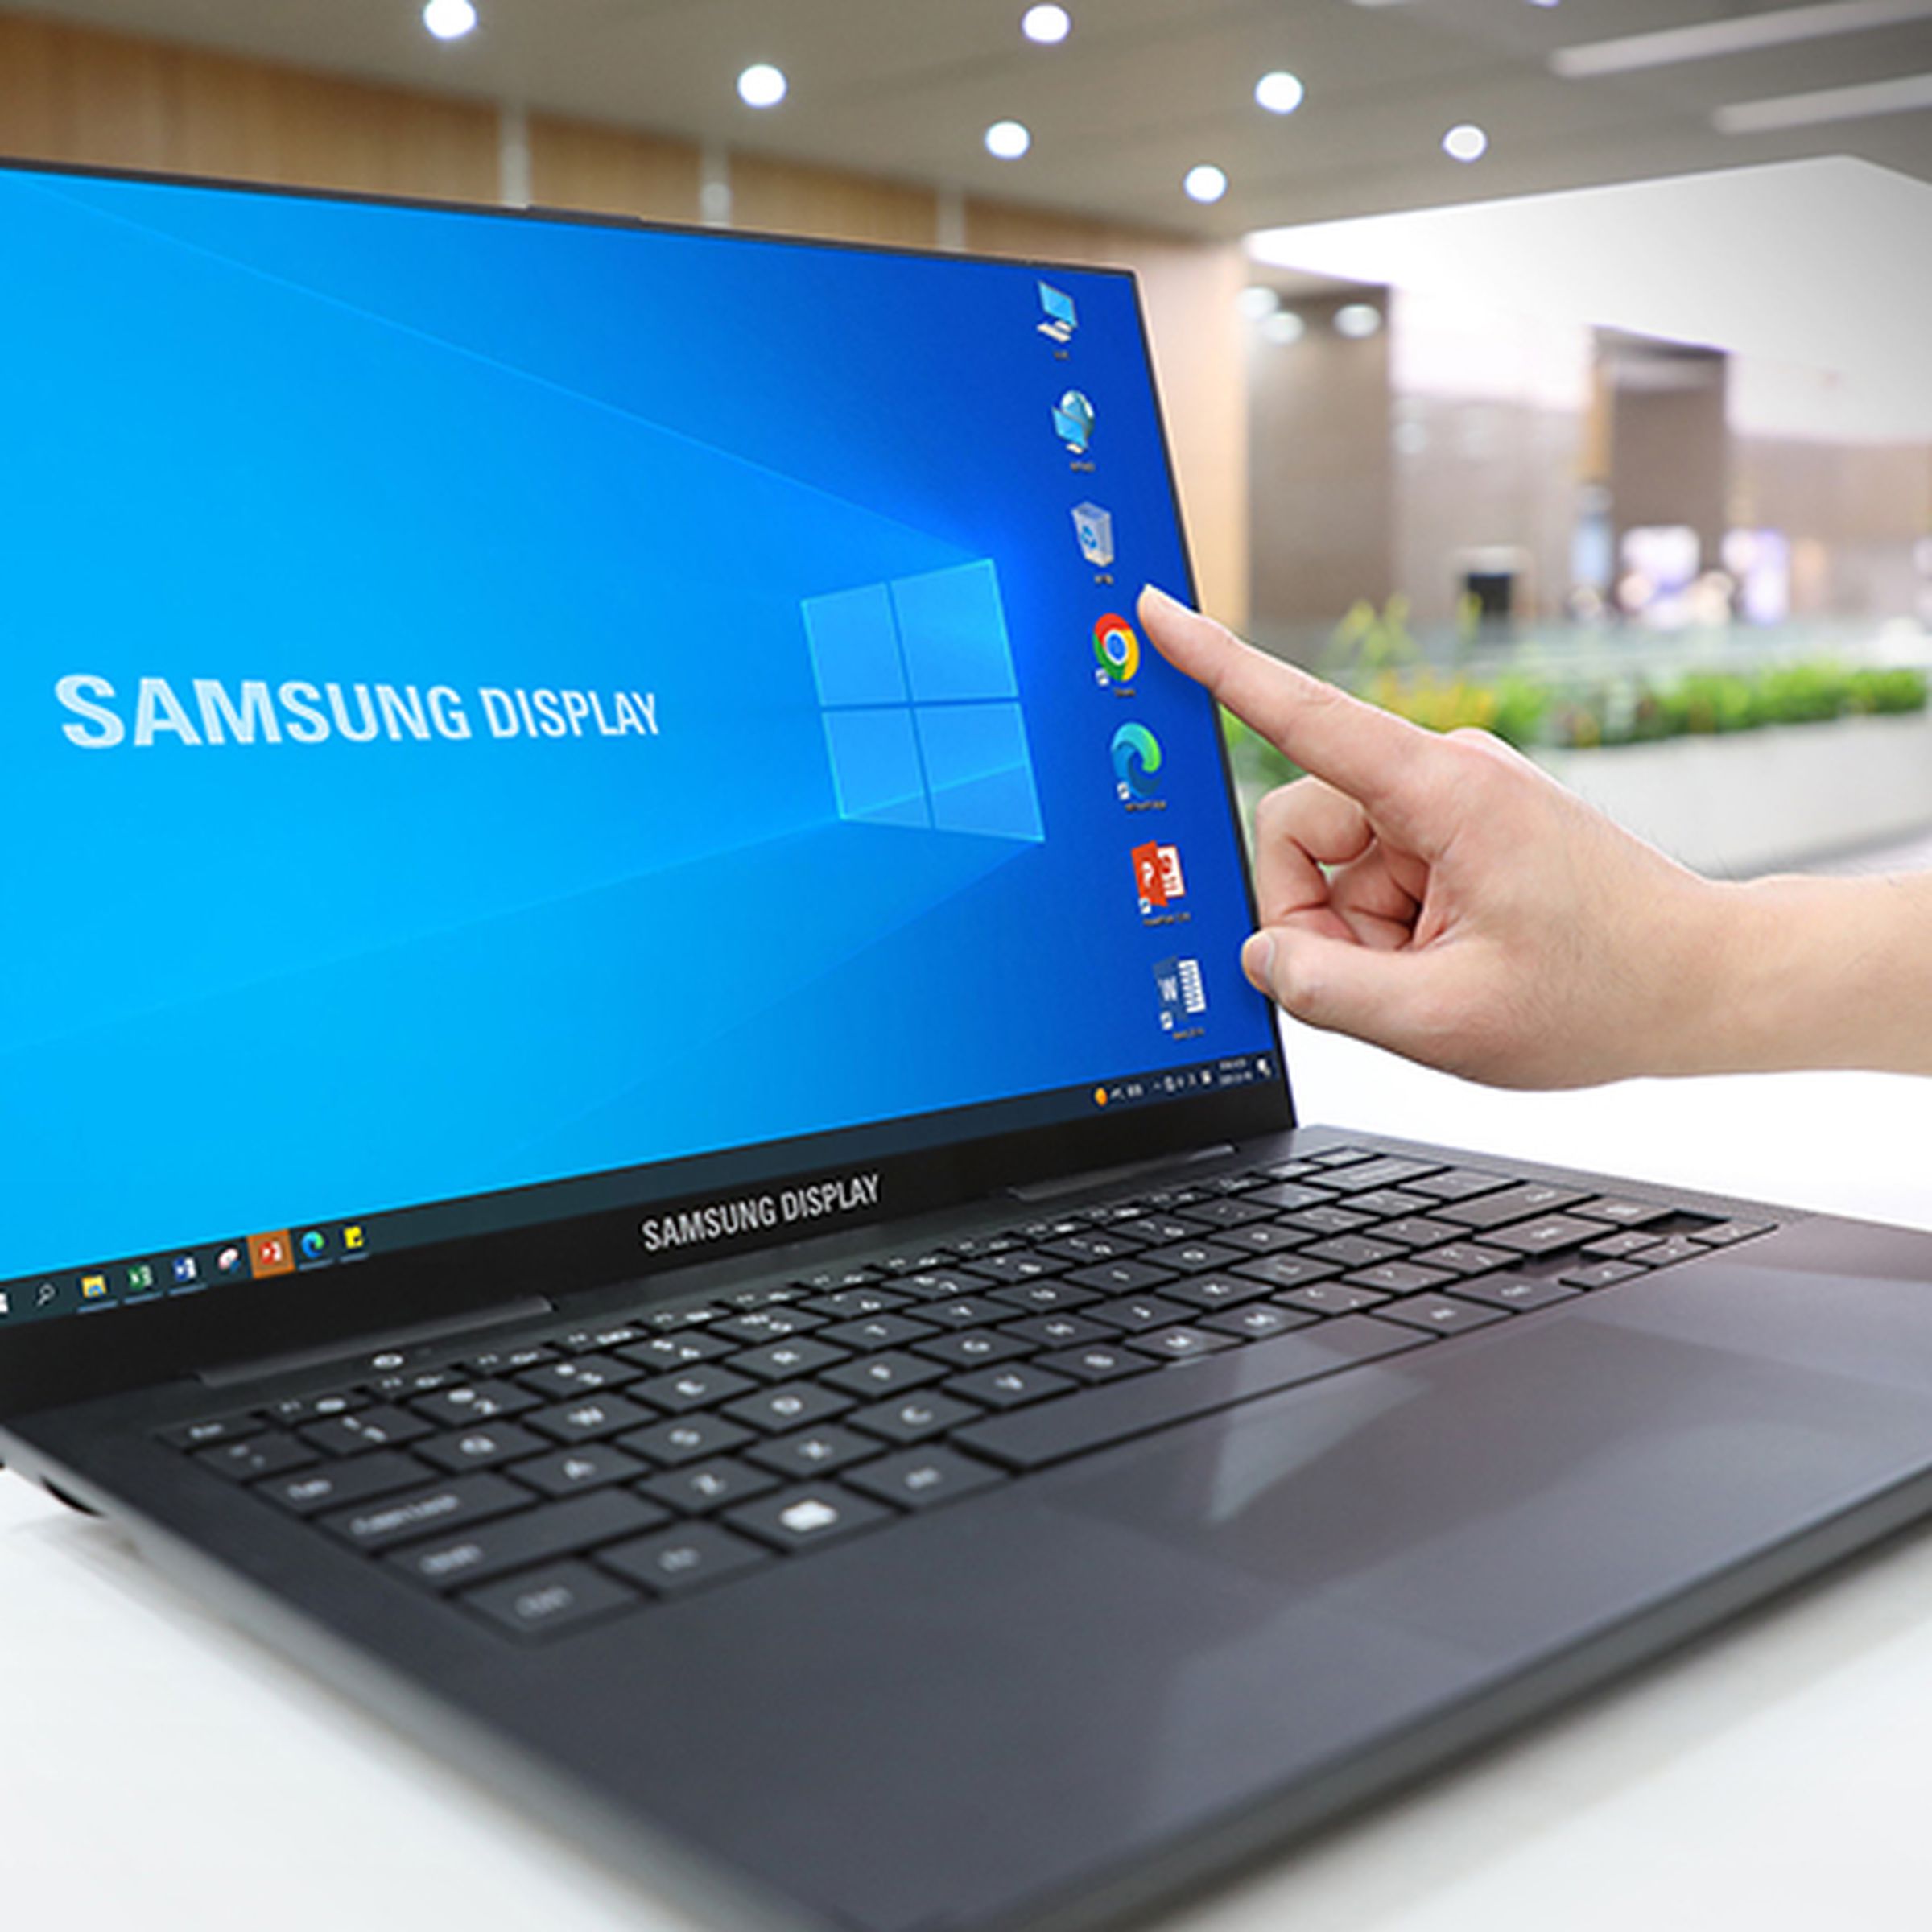 An image showing an OLED Samsung display on a notebook with touchscreen capabilities 